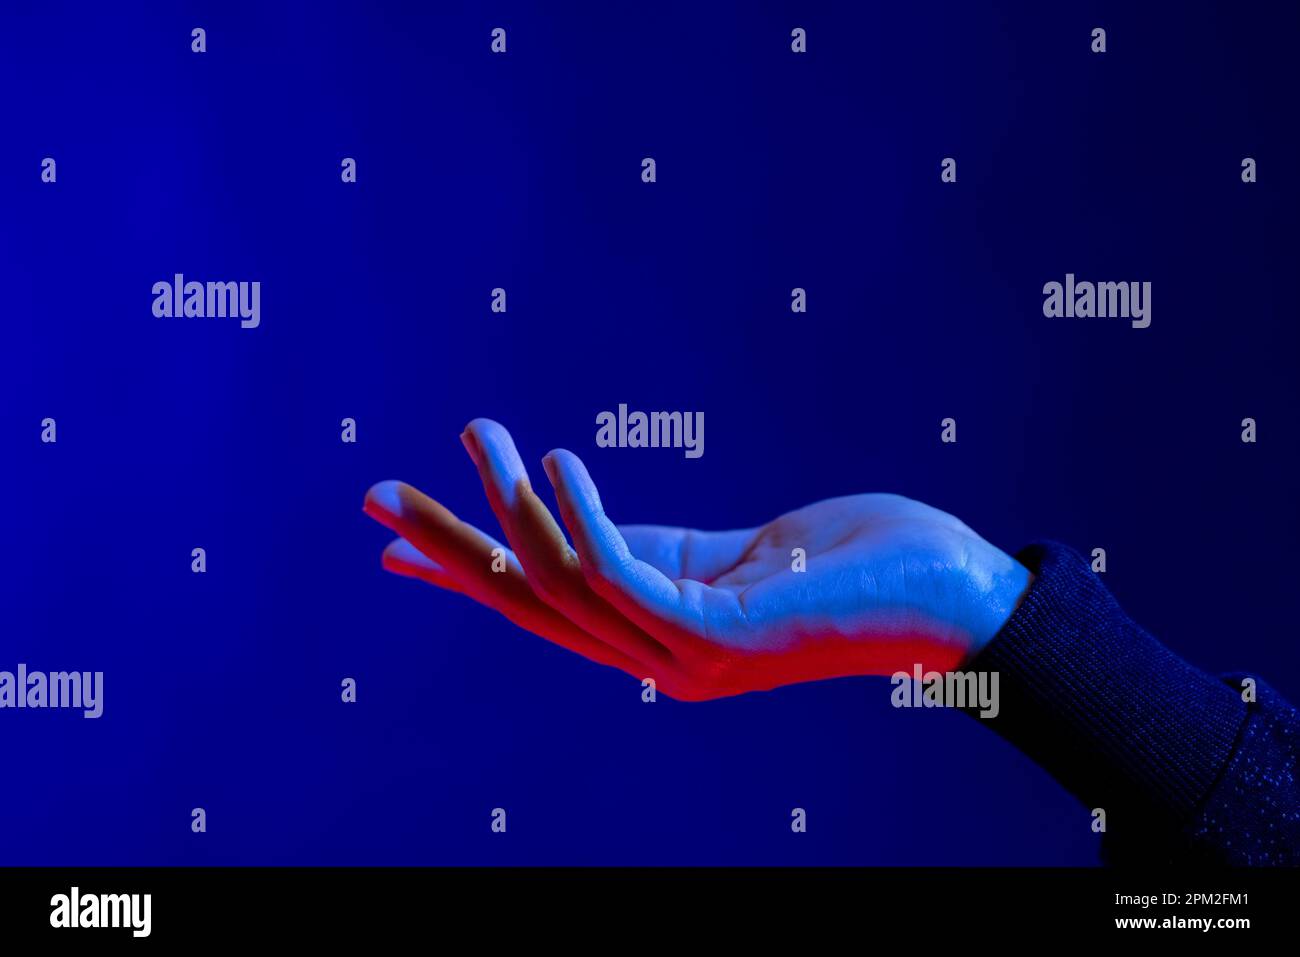 Exposed hand in studio with blue light with copy space Stock Photo